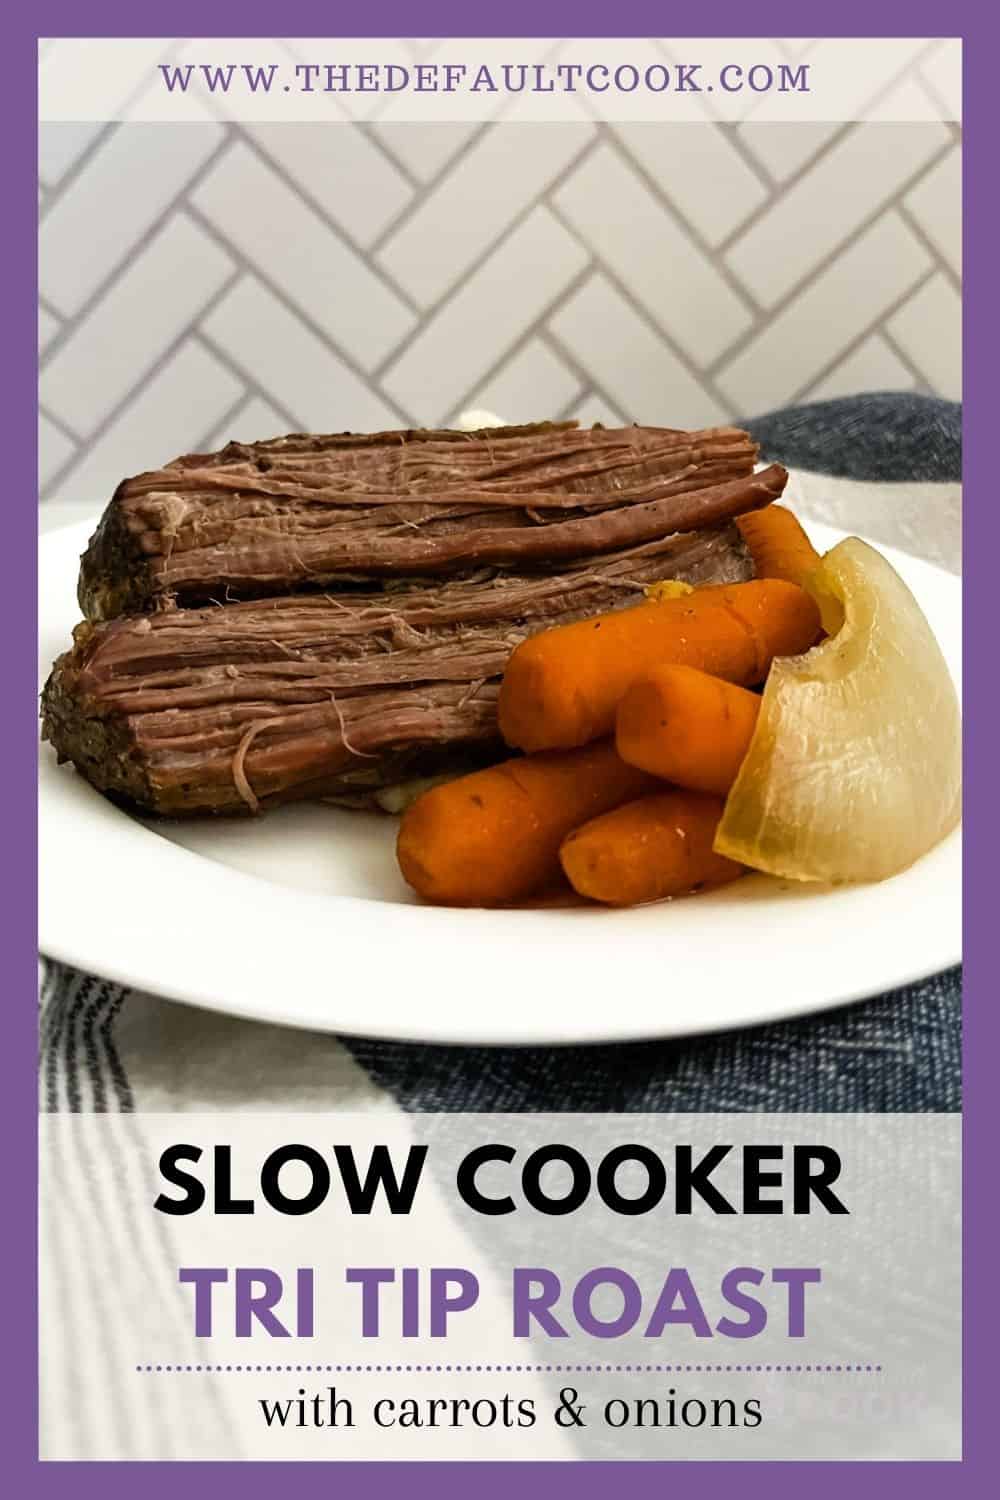 Two slices of beef roast with carrots and onions on a white plate, text below plate reads "slow cooker tri tip roast".